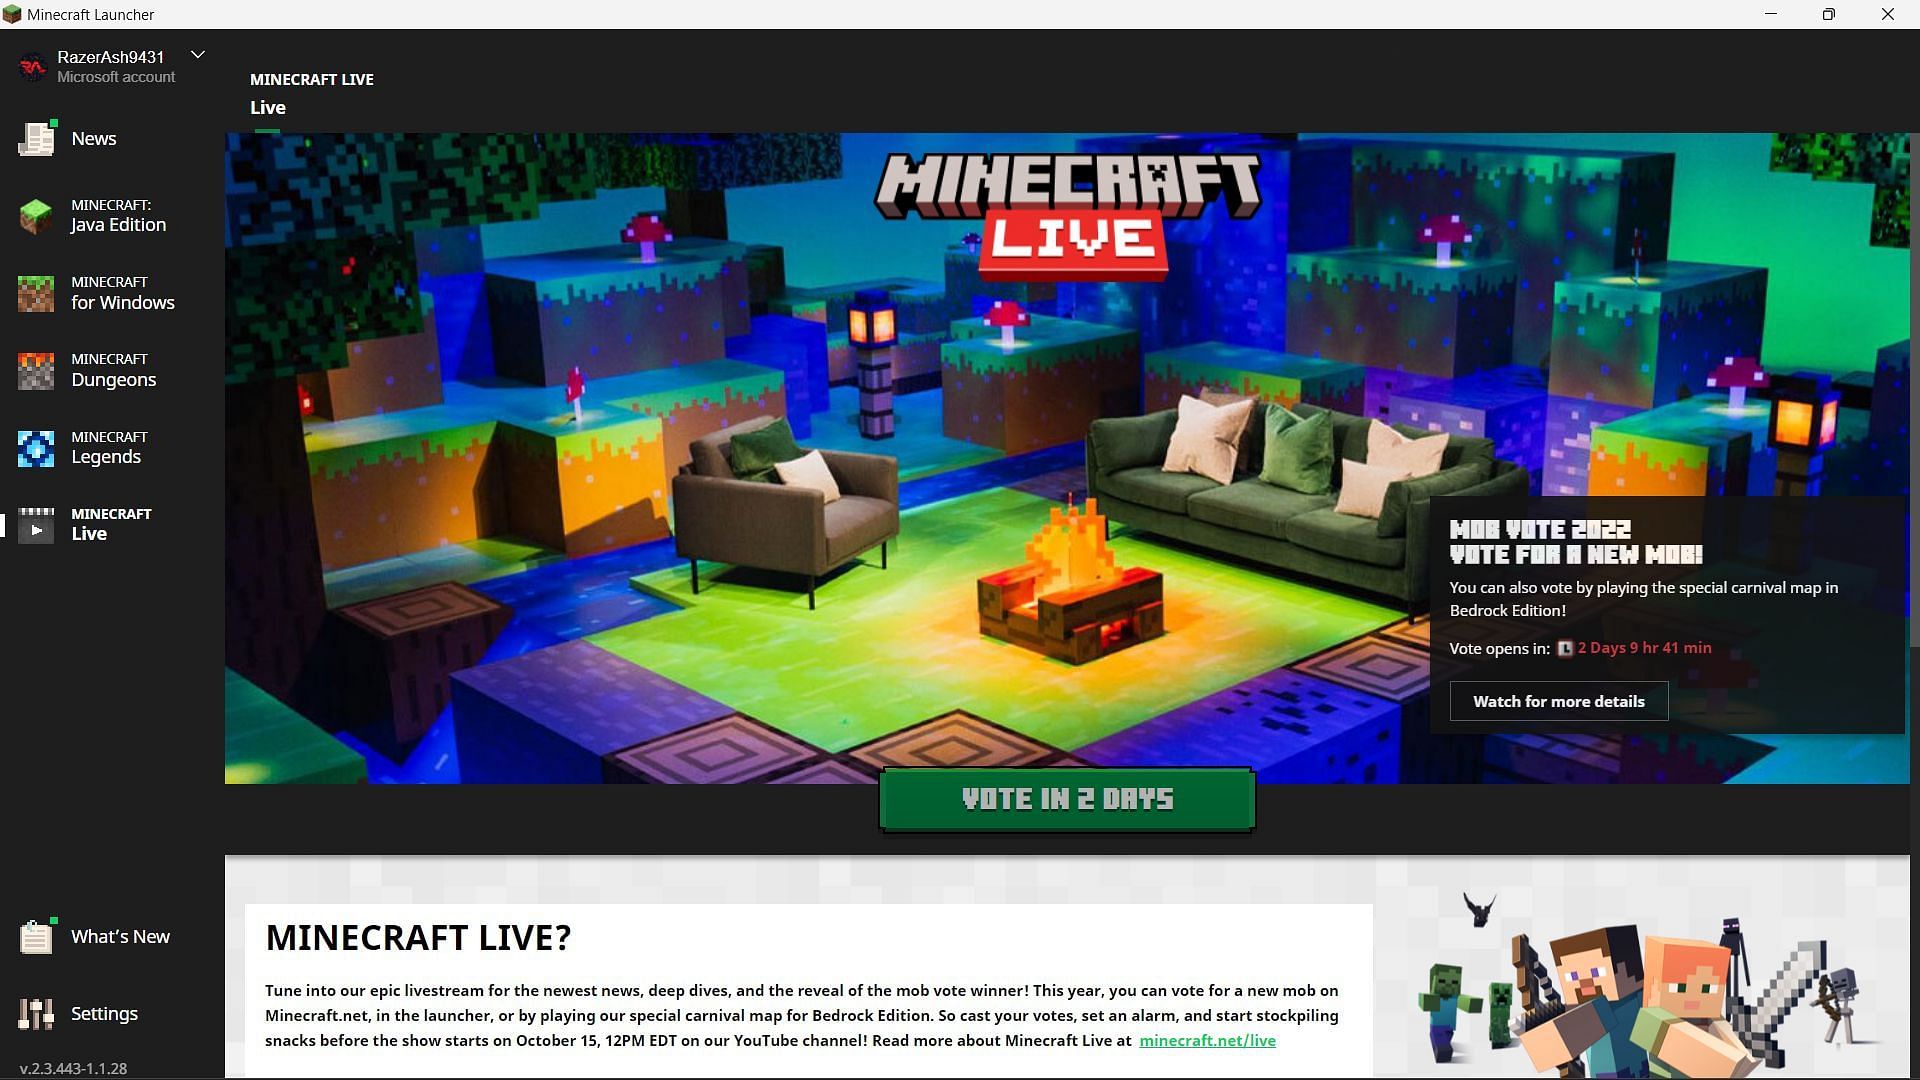 Mojang updated official game launcher to add new Minecraft Live tab (Image via Sportskeeda)